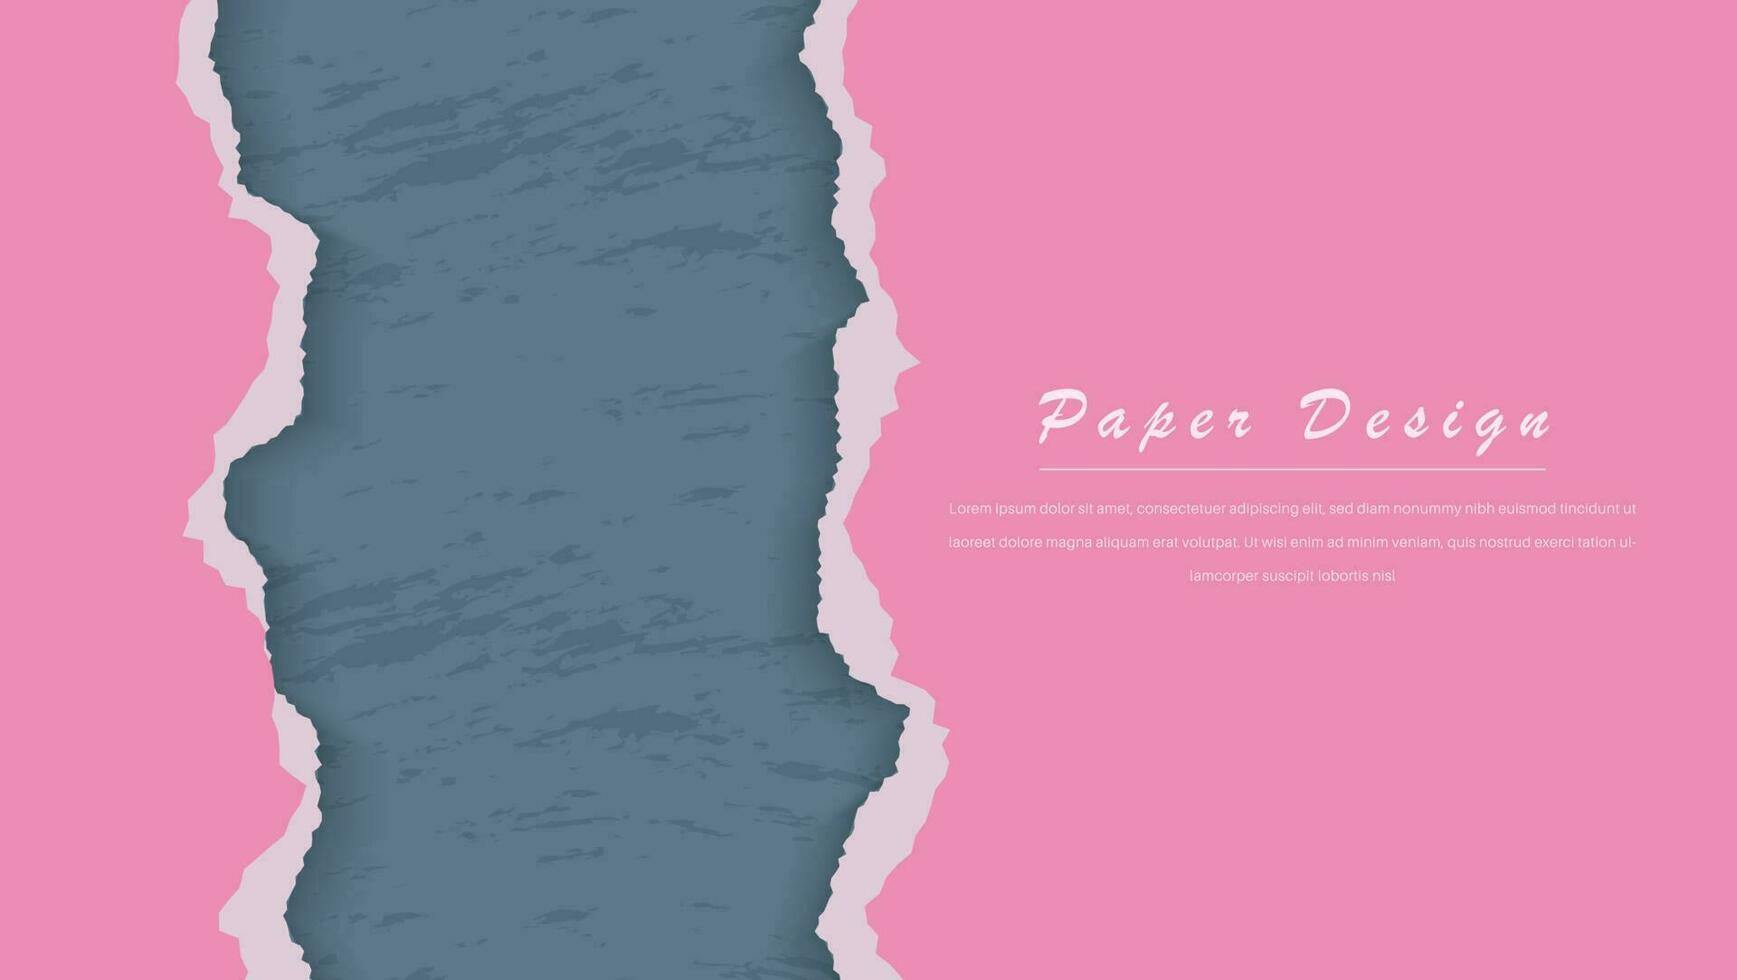 Abstract Vintage Pink Paper Ripped Design Template vector